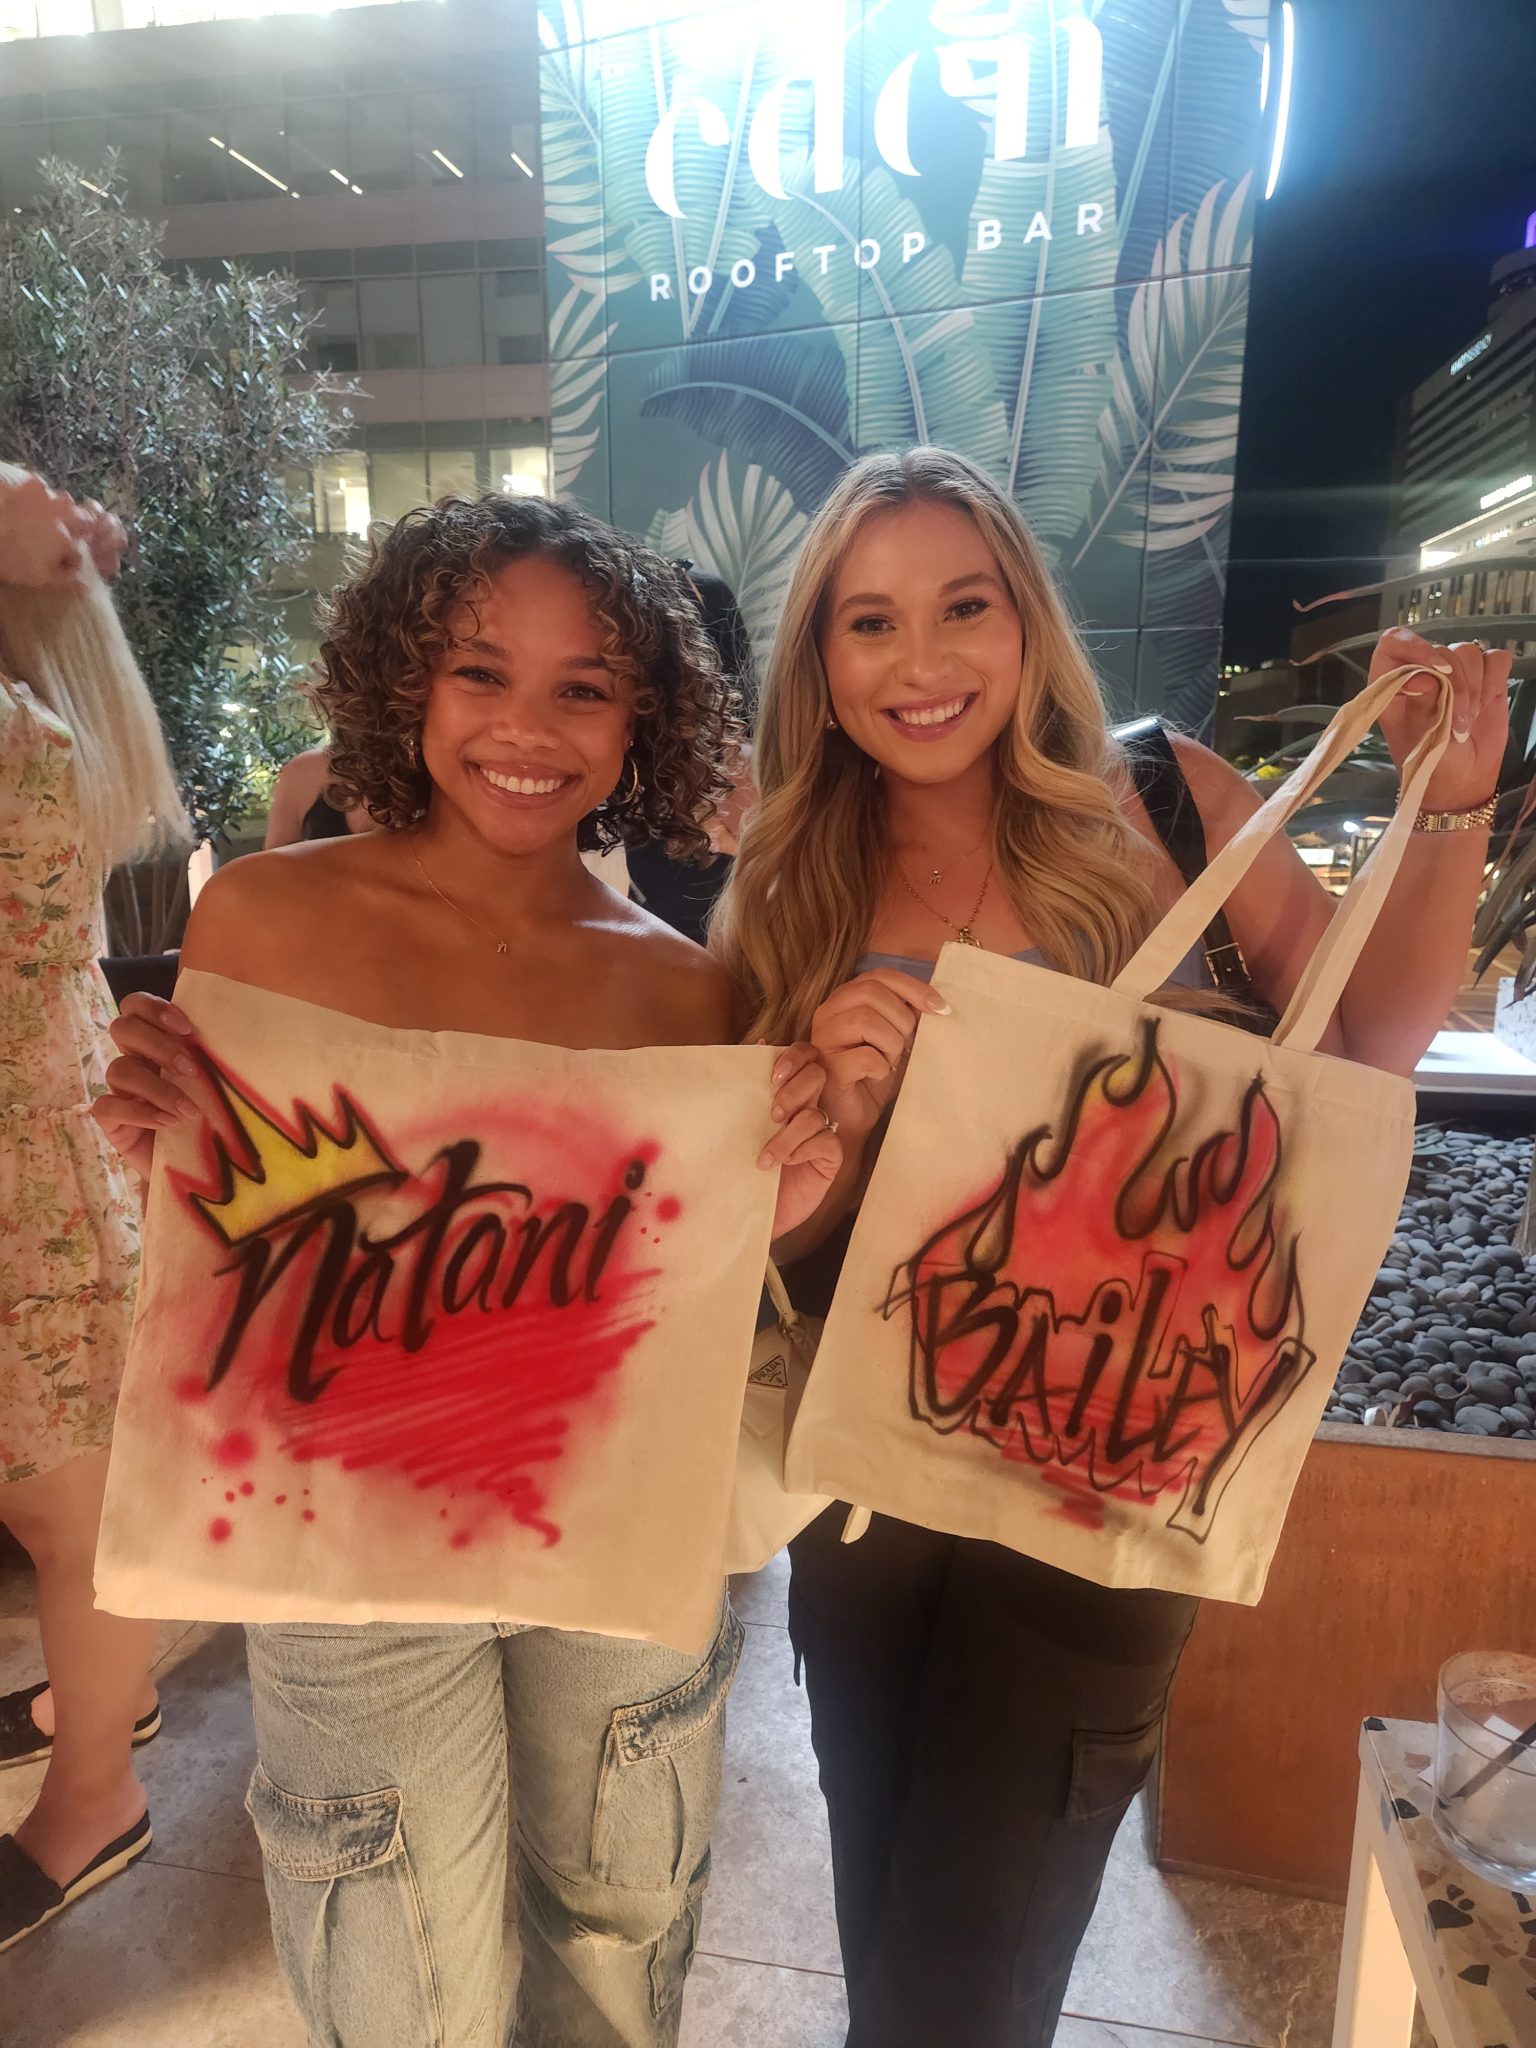 Airbrush tote bags are a great idea for parties.